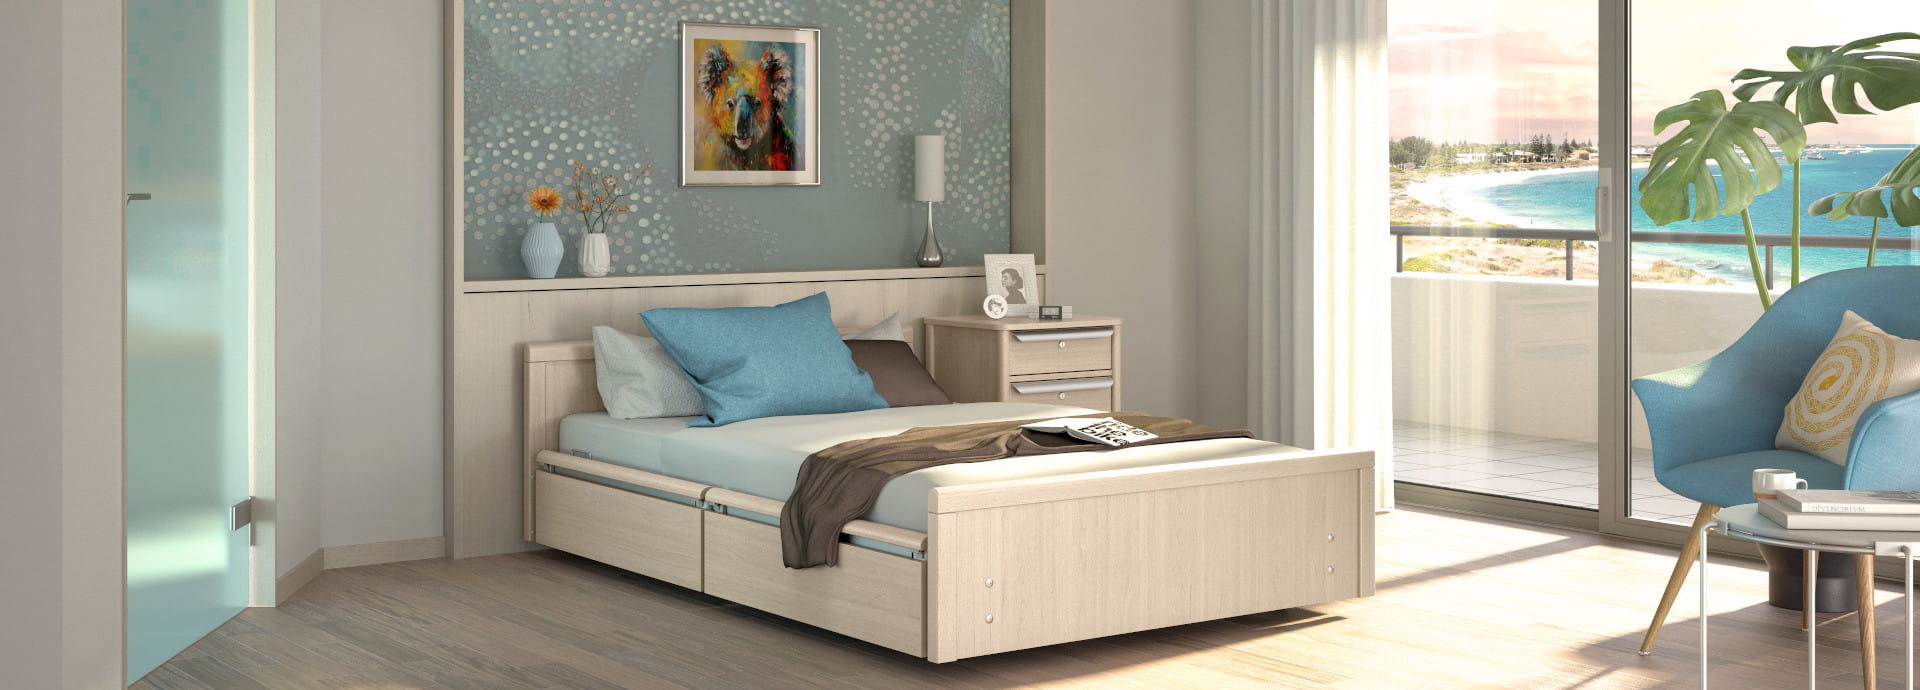 The sentida sc-xxl nursing bed is thoughtfully designed to streamline care processes and align with bariatric care concepts,